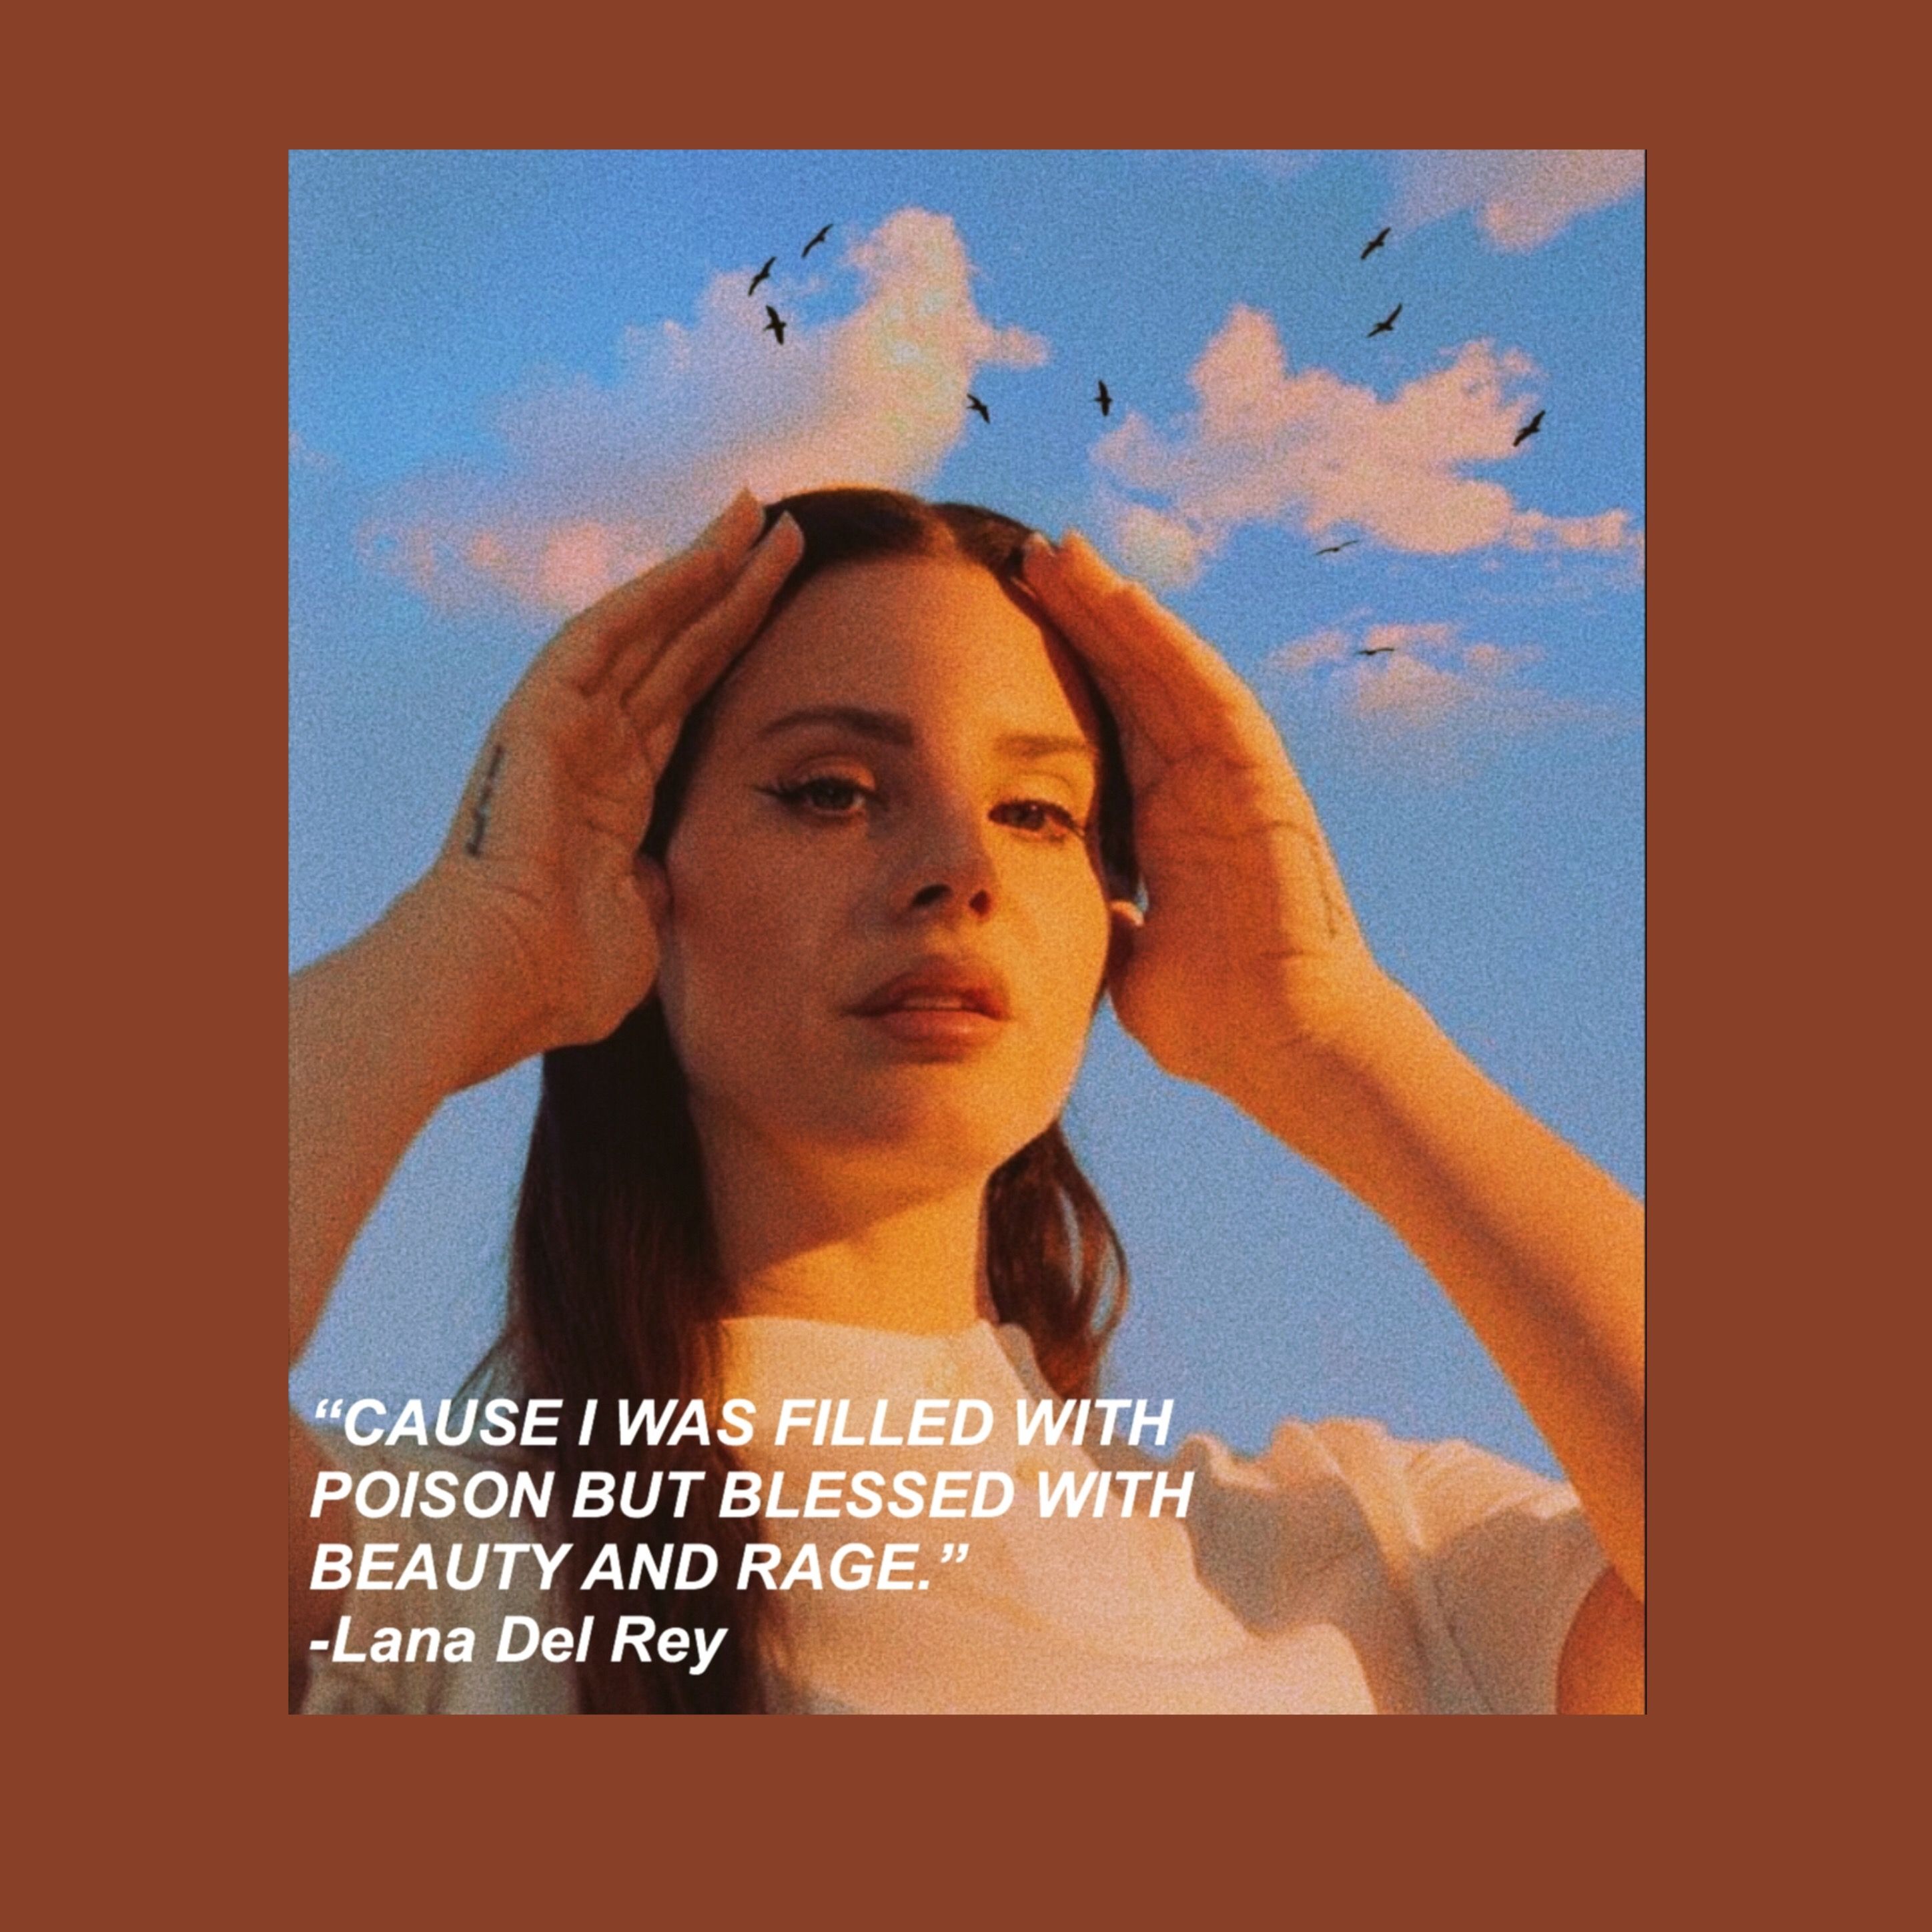 A woman with her head in the clouds - Lana Del Rey